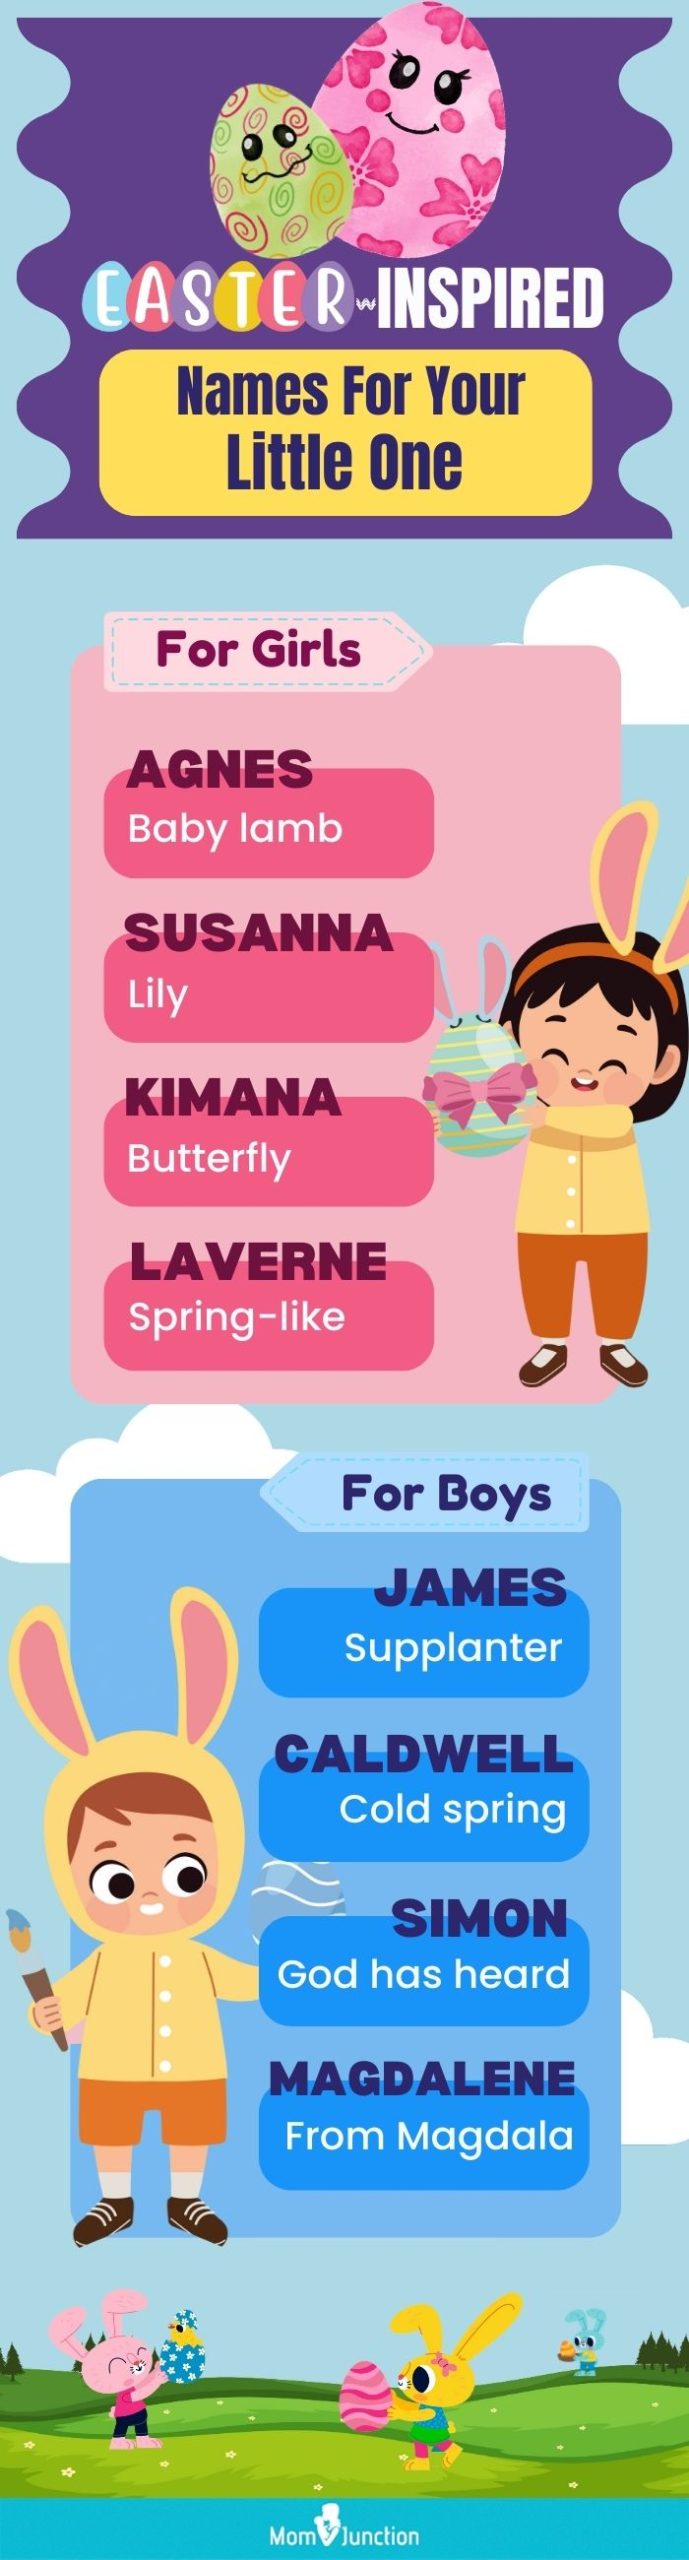 easter inspired names for your little one [infographic]